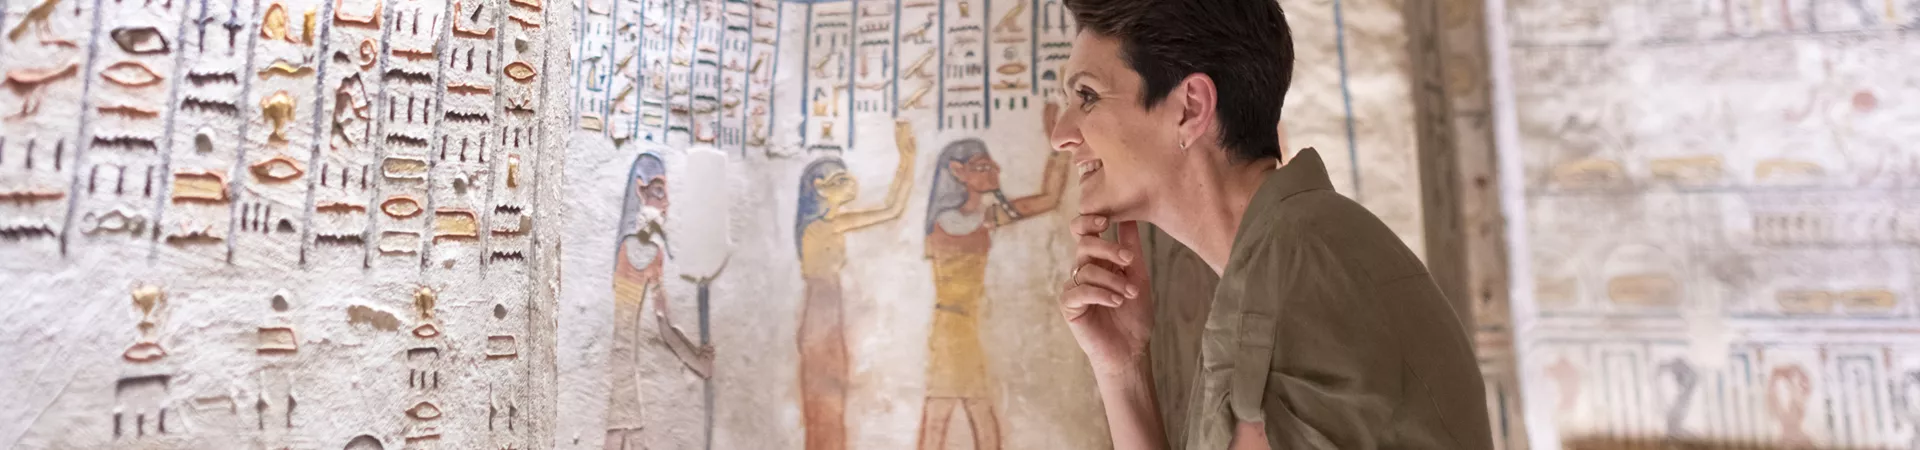 Lady on Egypt tour looking at ancient drawings